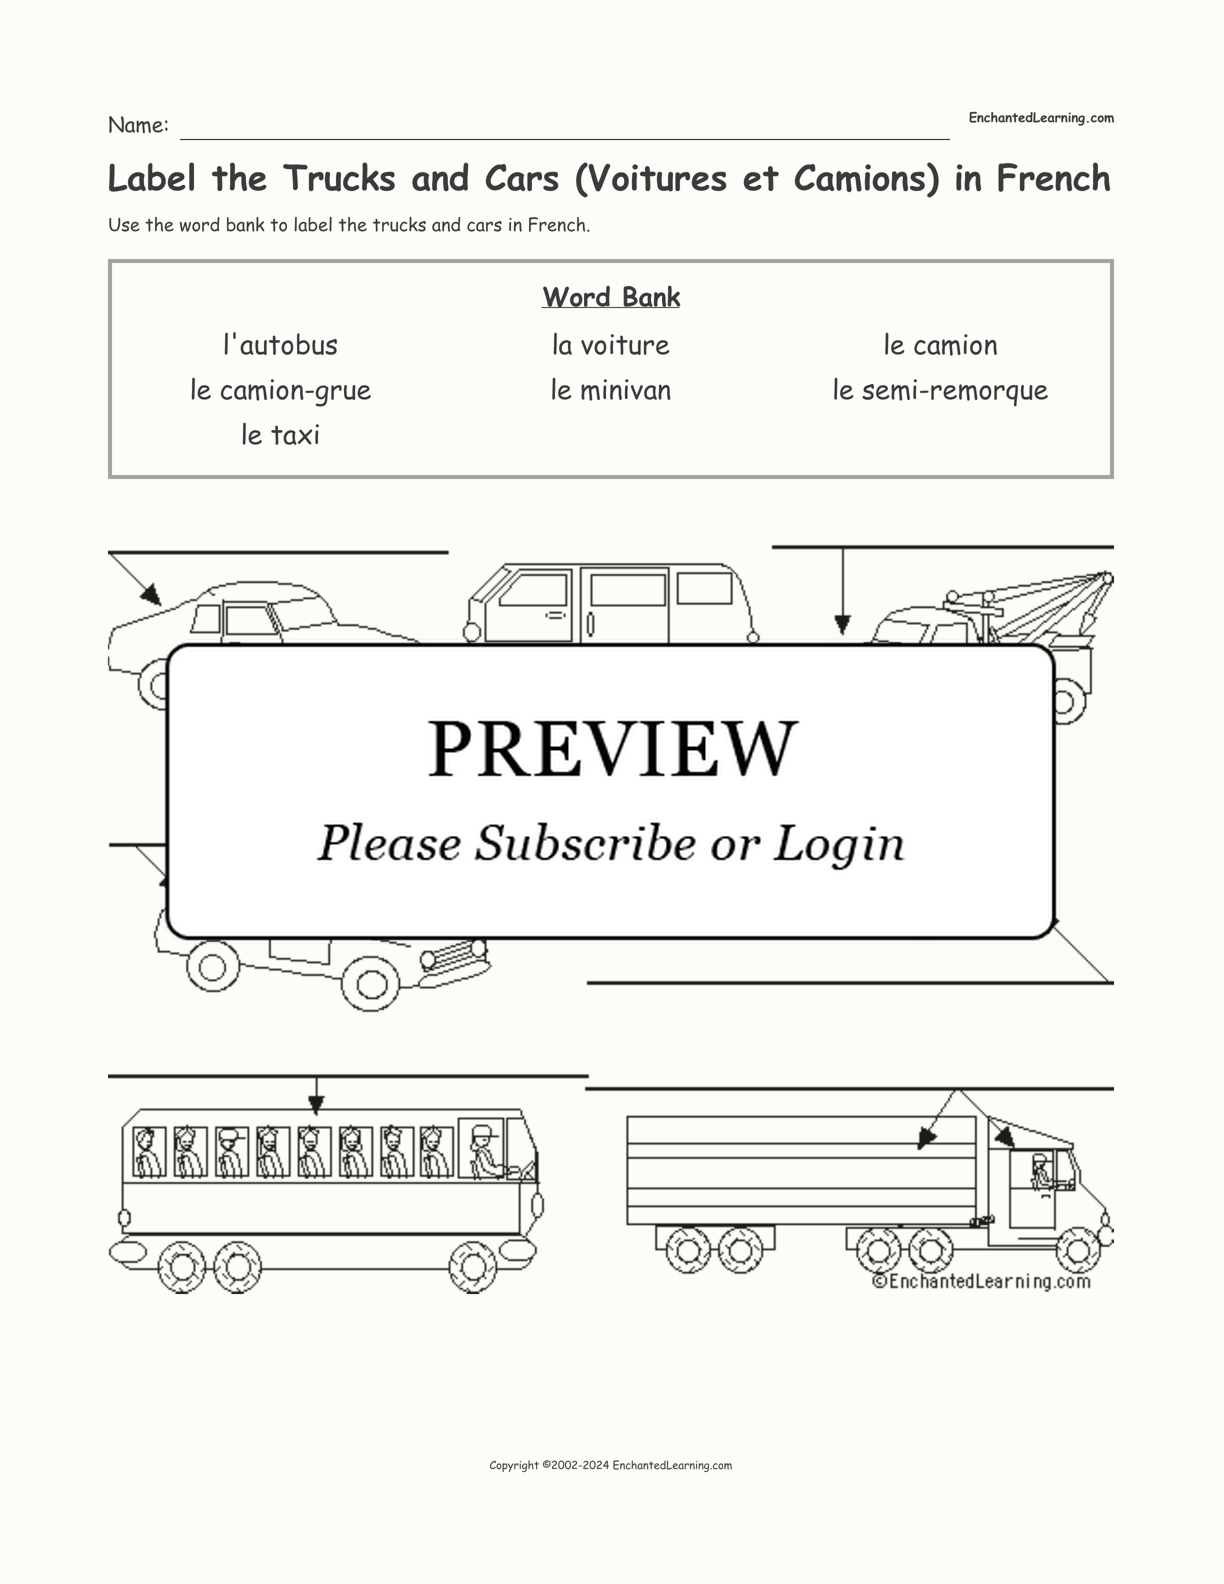 Label the Trucks and Cars (Voitures et Camions) in French interactive worksheet page 1